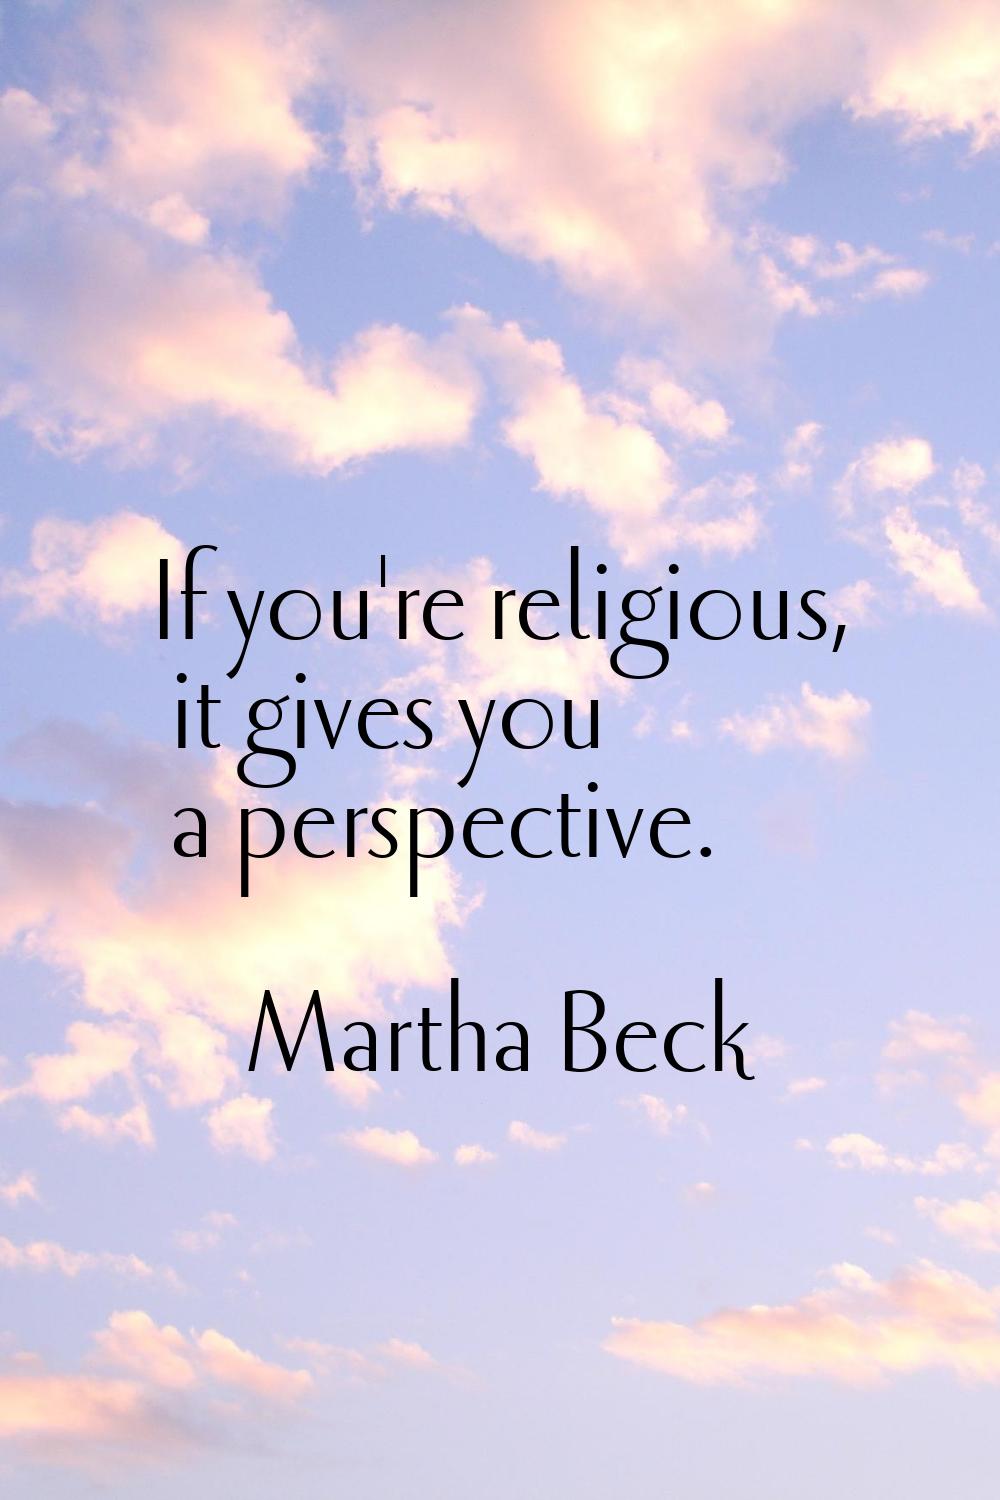 If you're religious, it gives you a perspective.